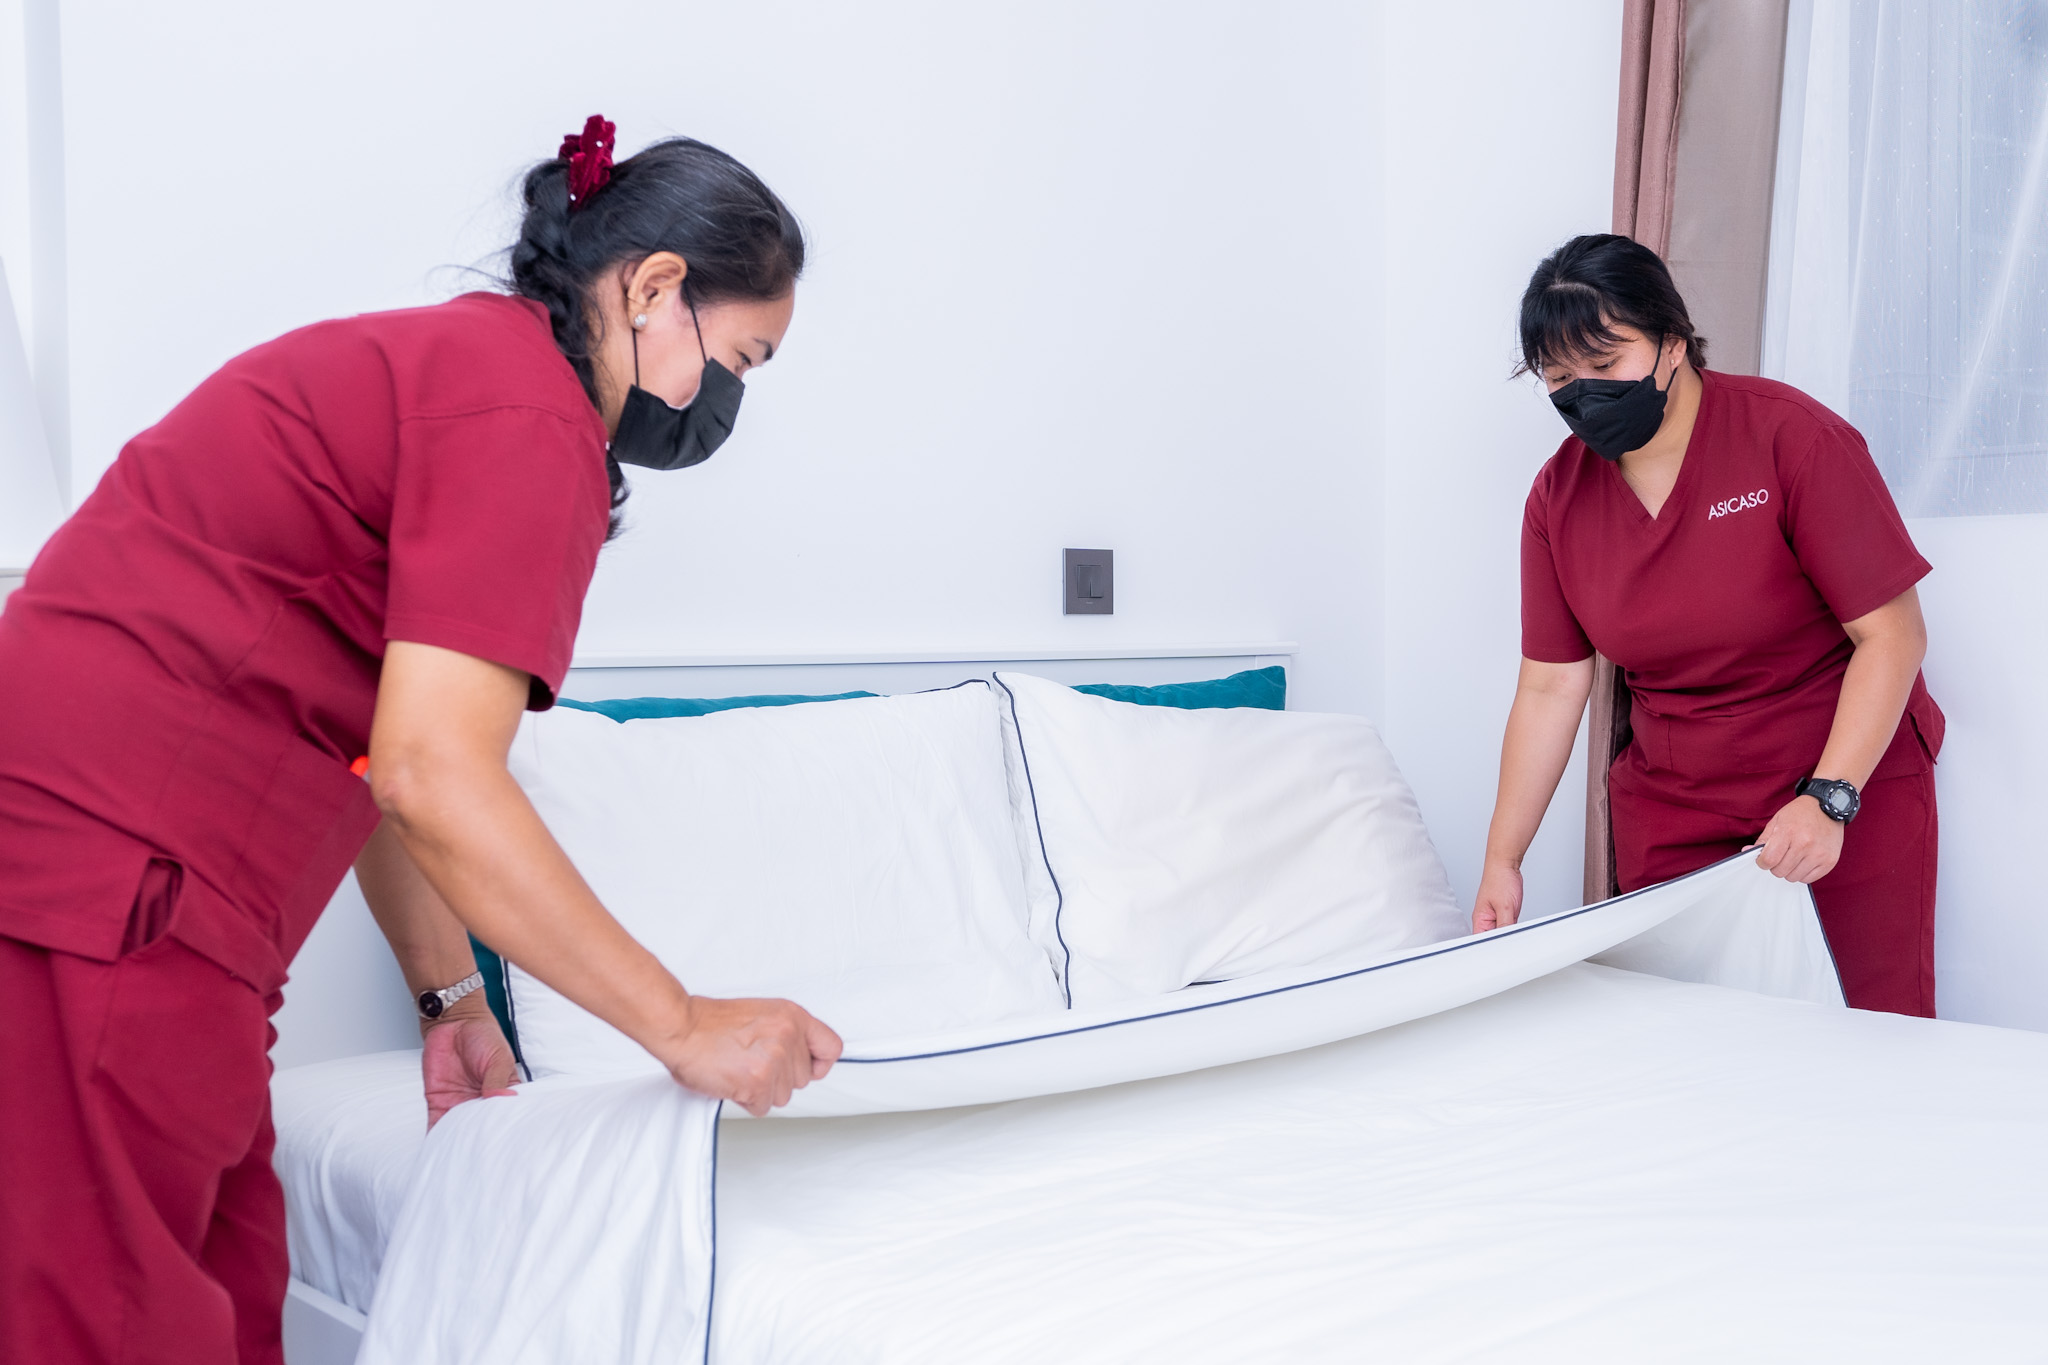 emiratesmaidscleaners.com emirates maids, cleaners, baby sitters and nannies in dubai